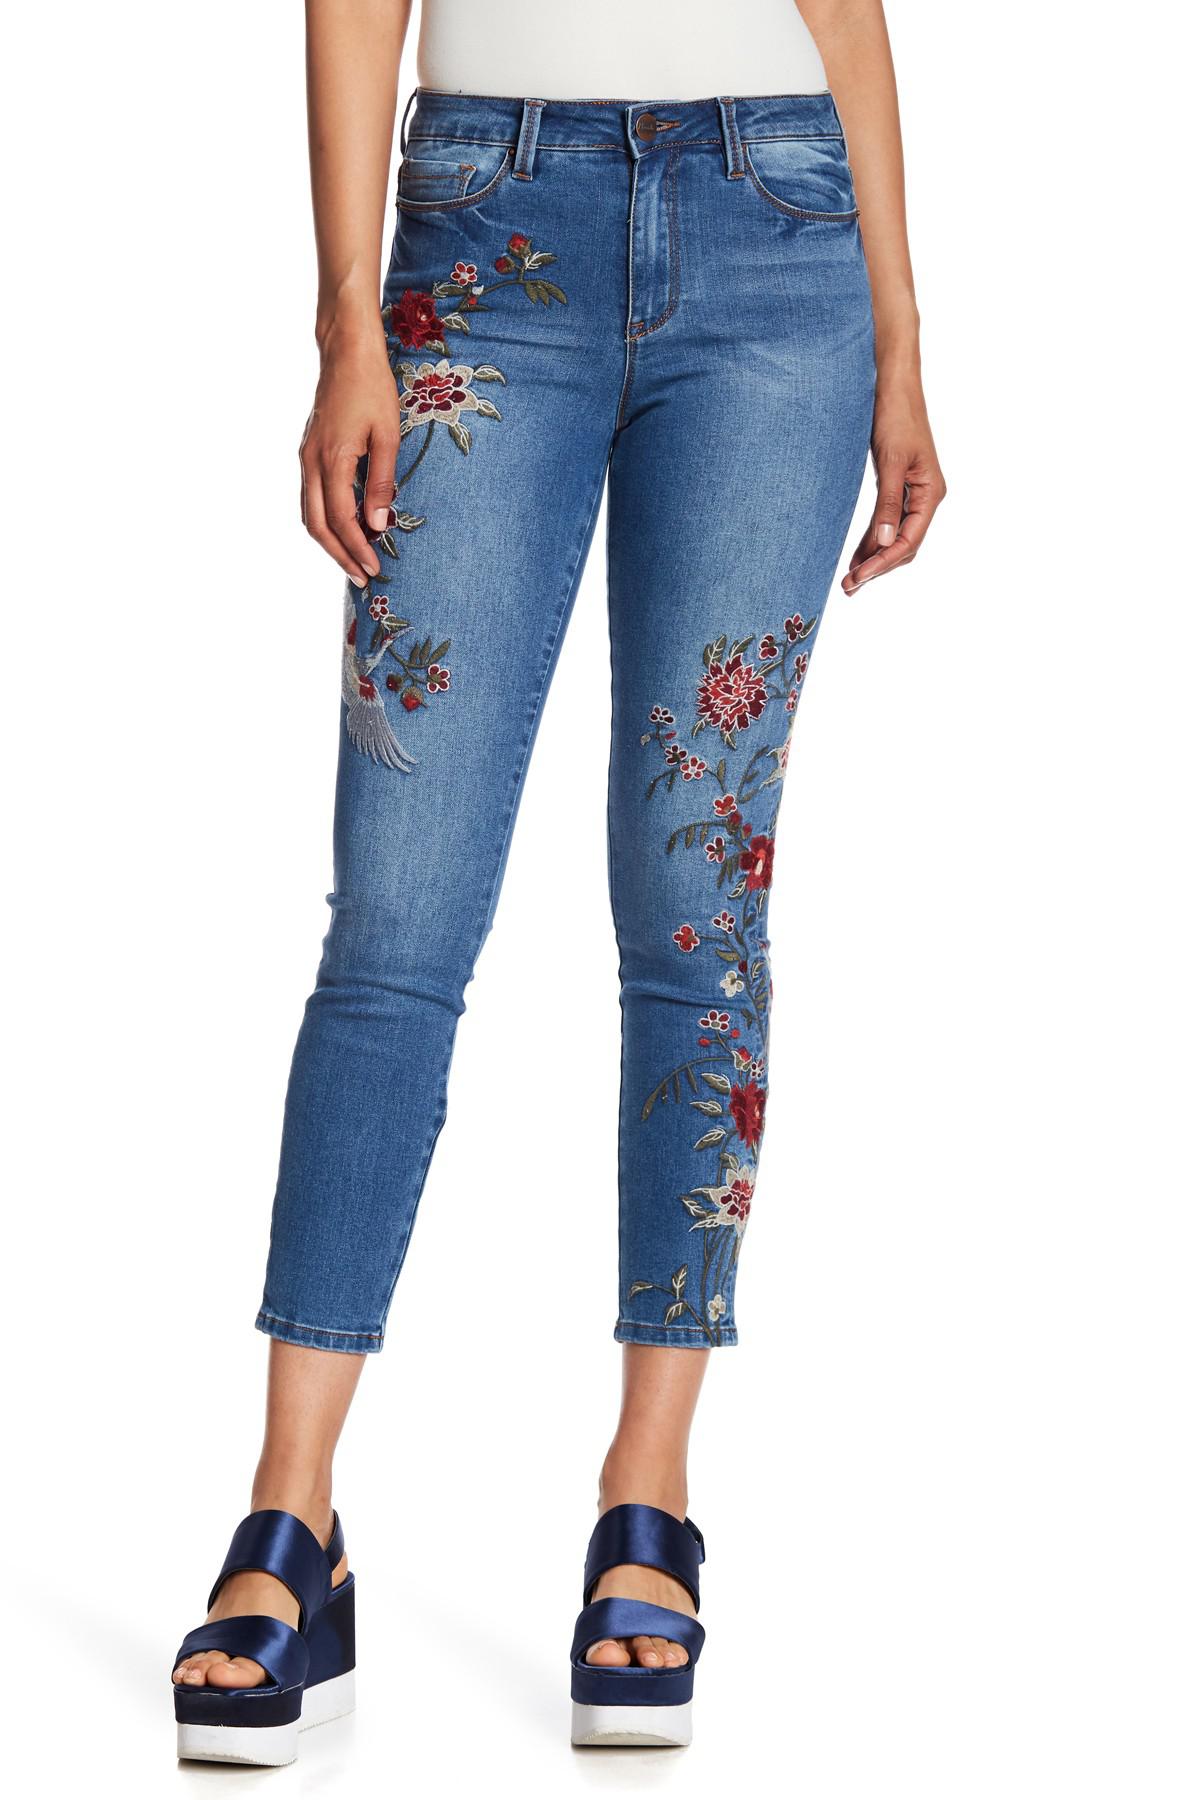 Nanette Lepore High Rise Embroidered Skinny Jeans in Blue | Lyst